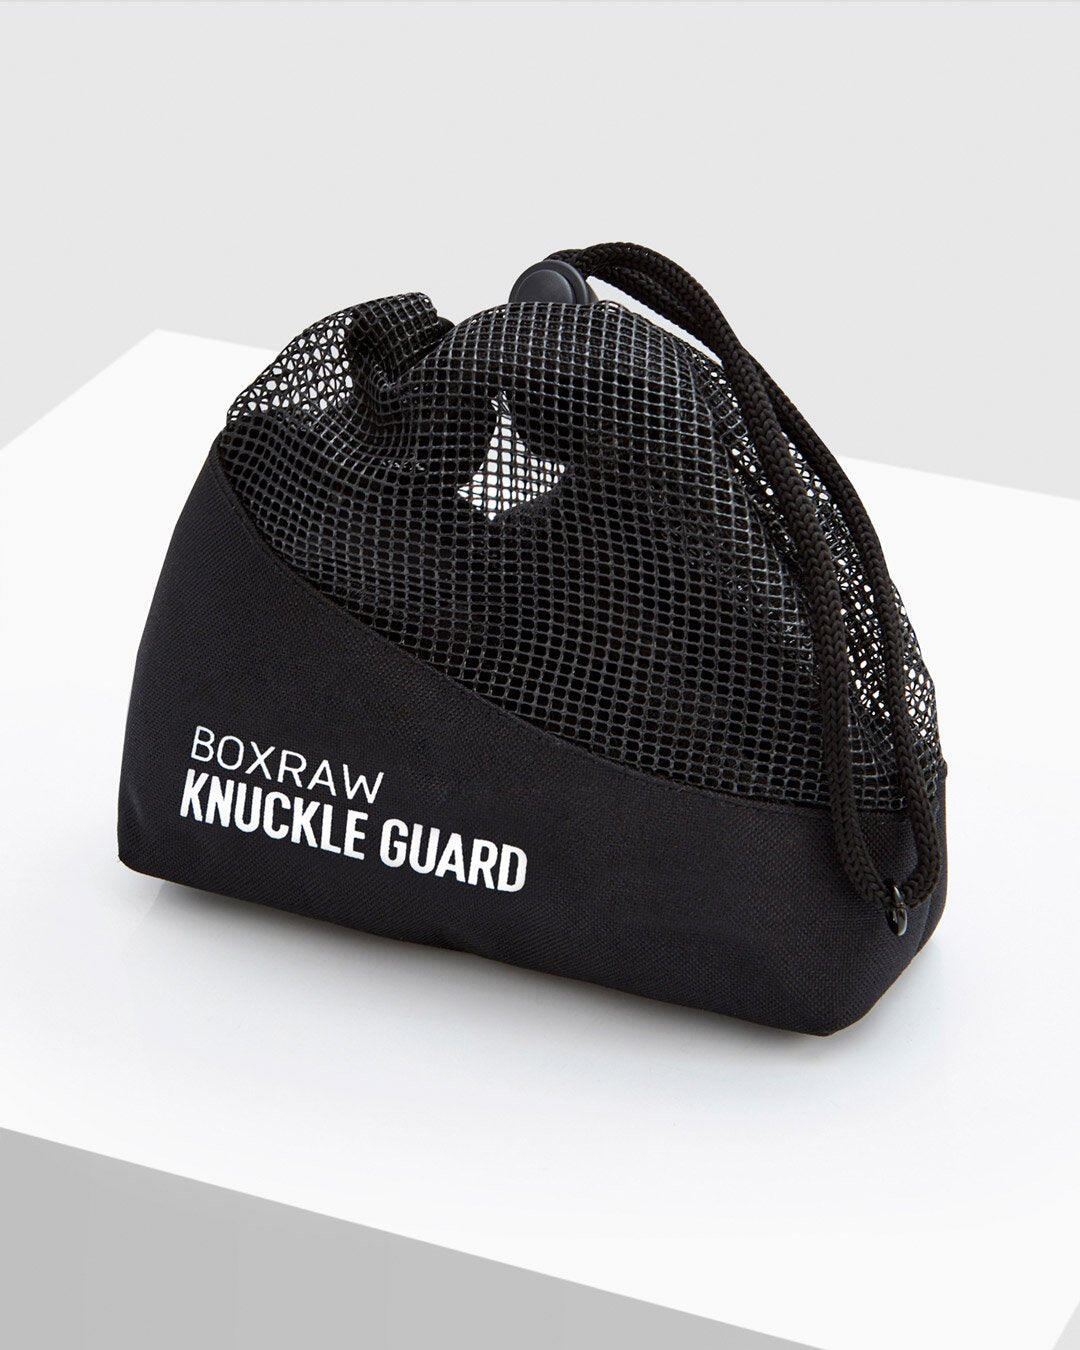 BOXRAW Knuckle Guard - Black 6/7